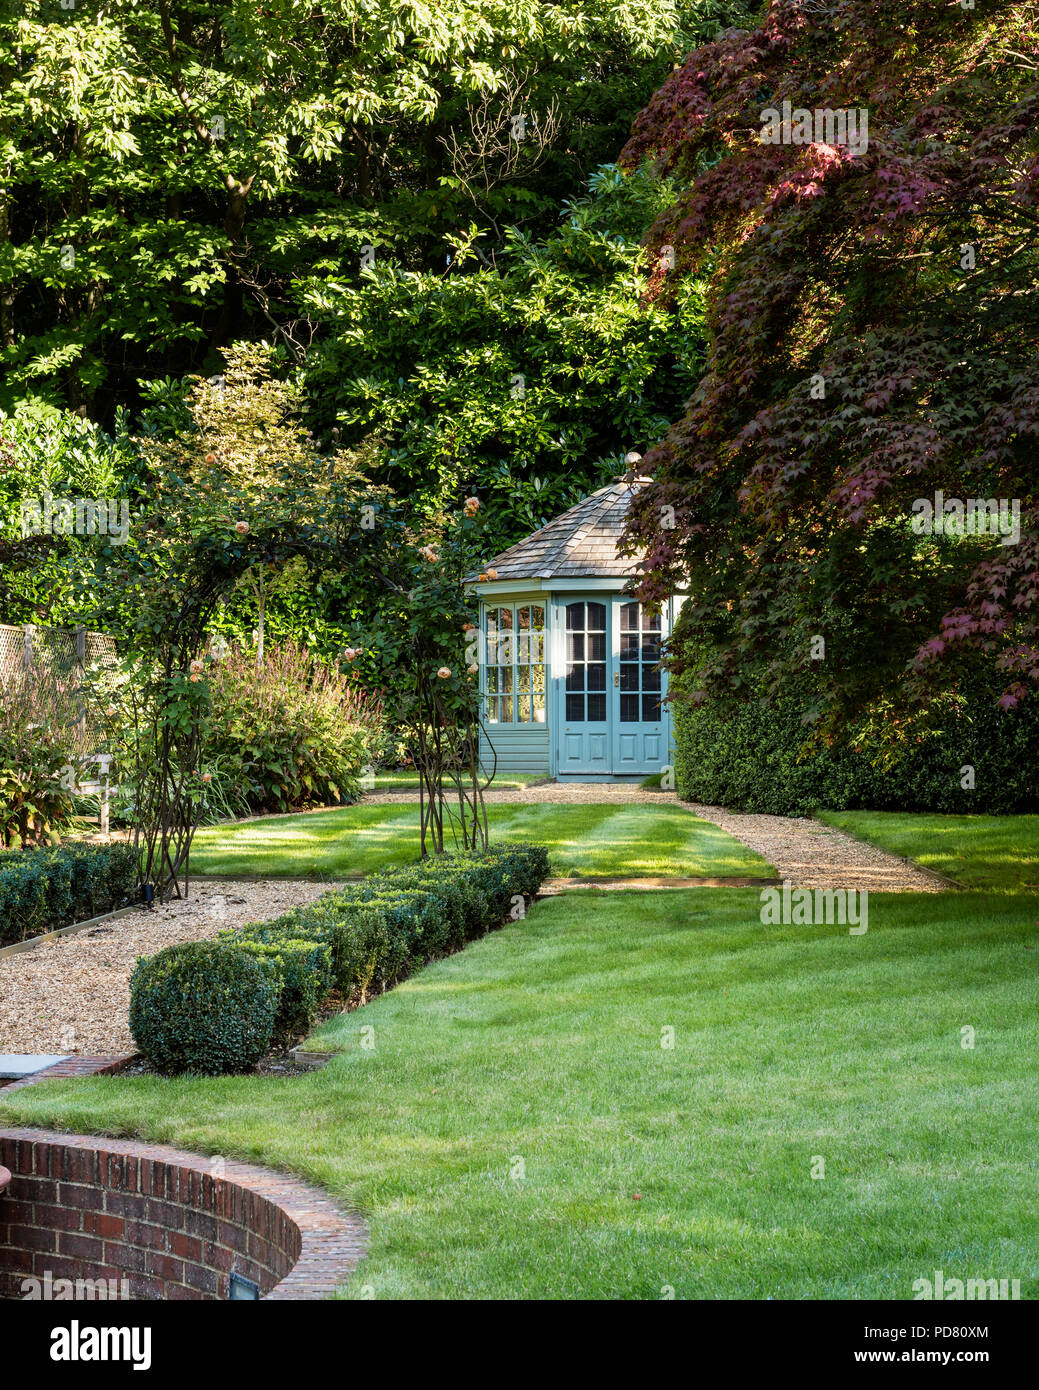 Neat country garden with box hedge and summer house Stock Photo